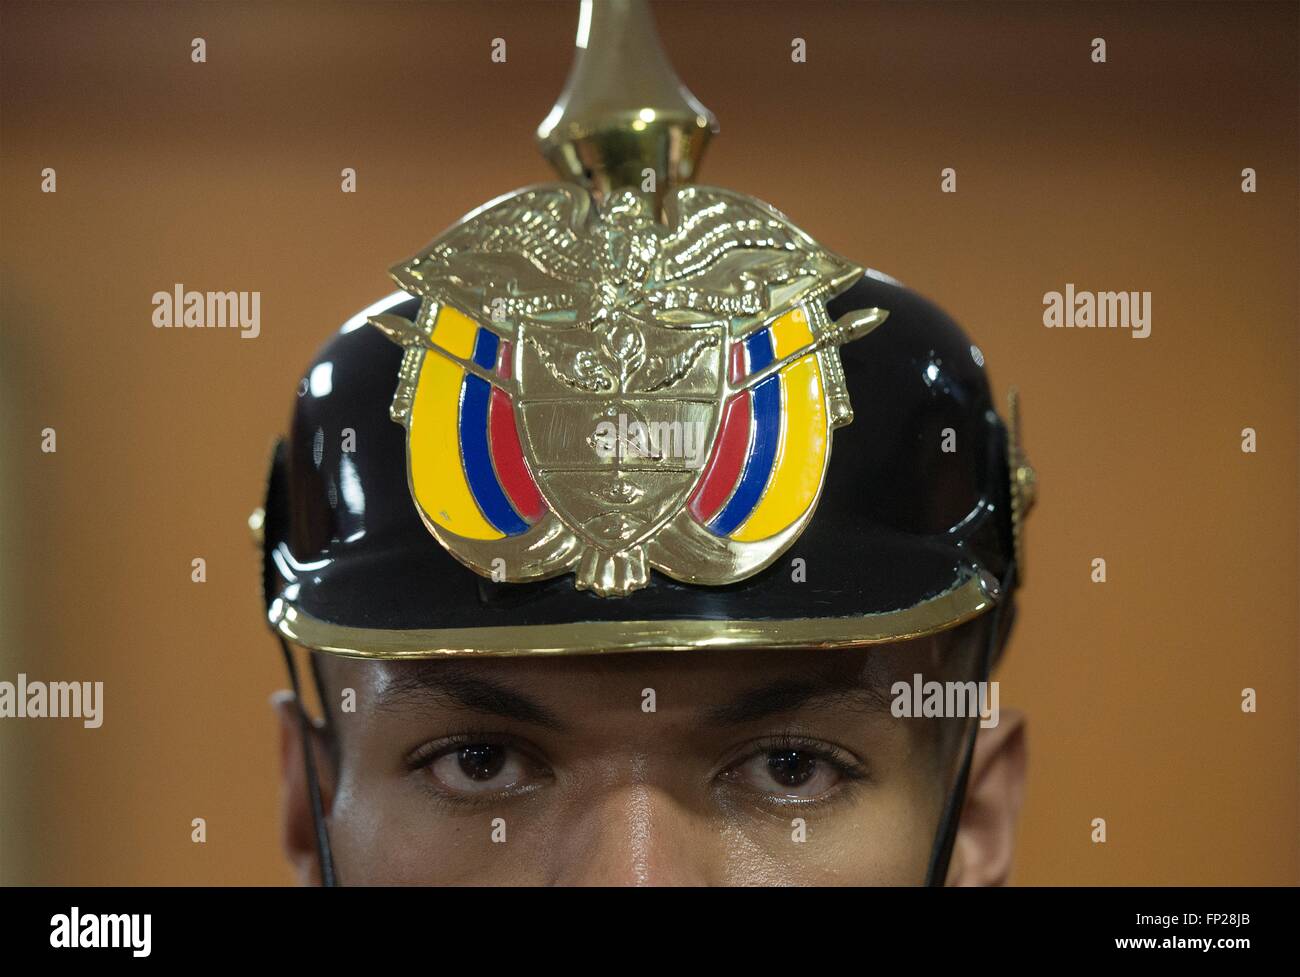 A Colombian honor guard stands at attention during the award ceremony for  U.S. Chairman of the Joint Chiefs General Joseph Dunford at the  Headquarters of the Military Forces March 10, 2016 in